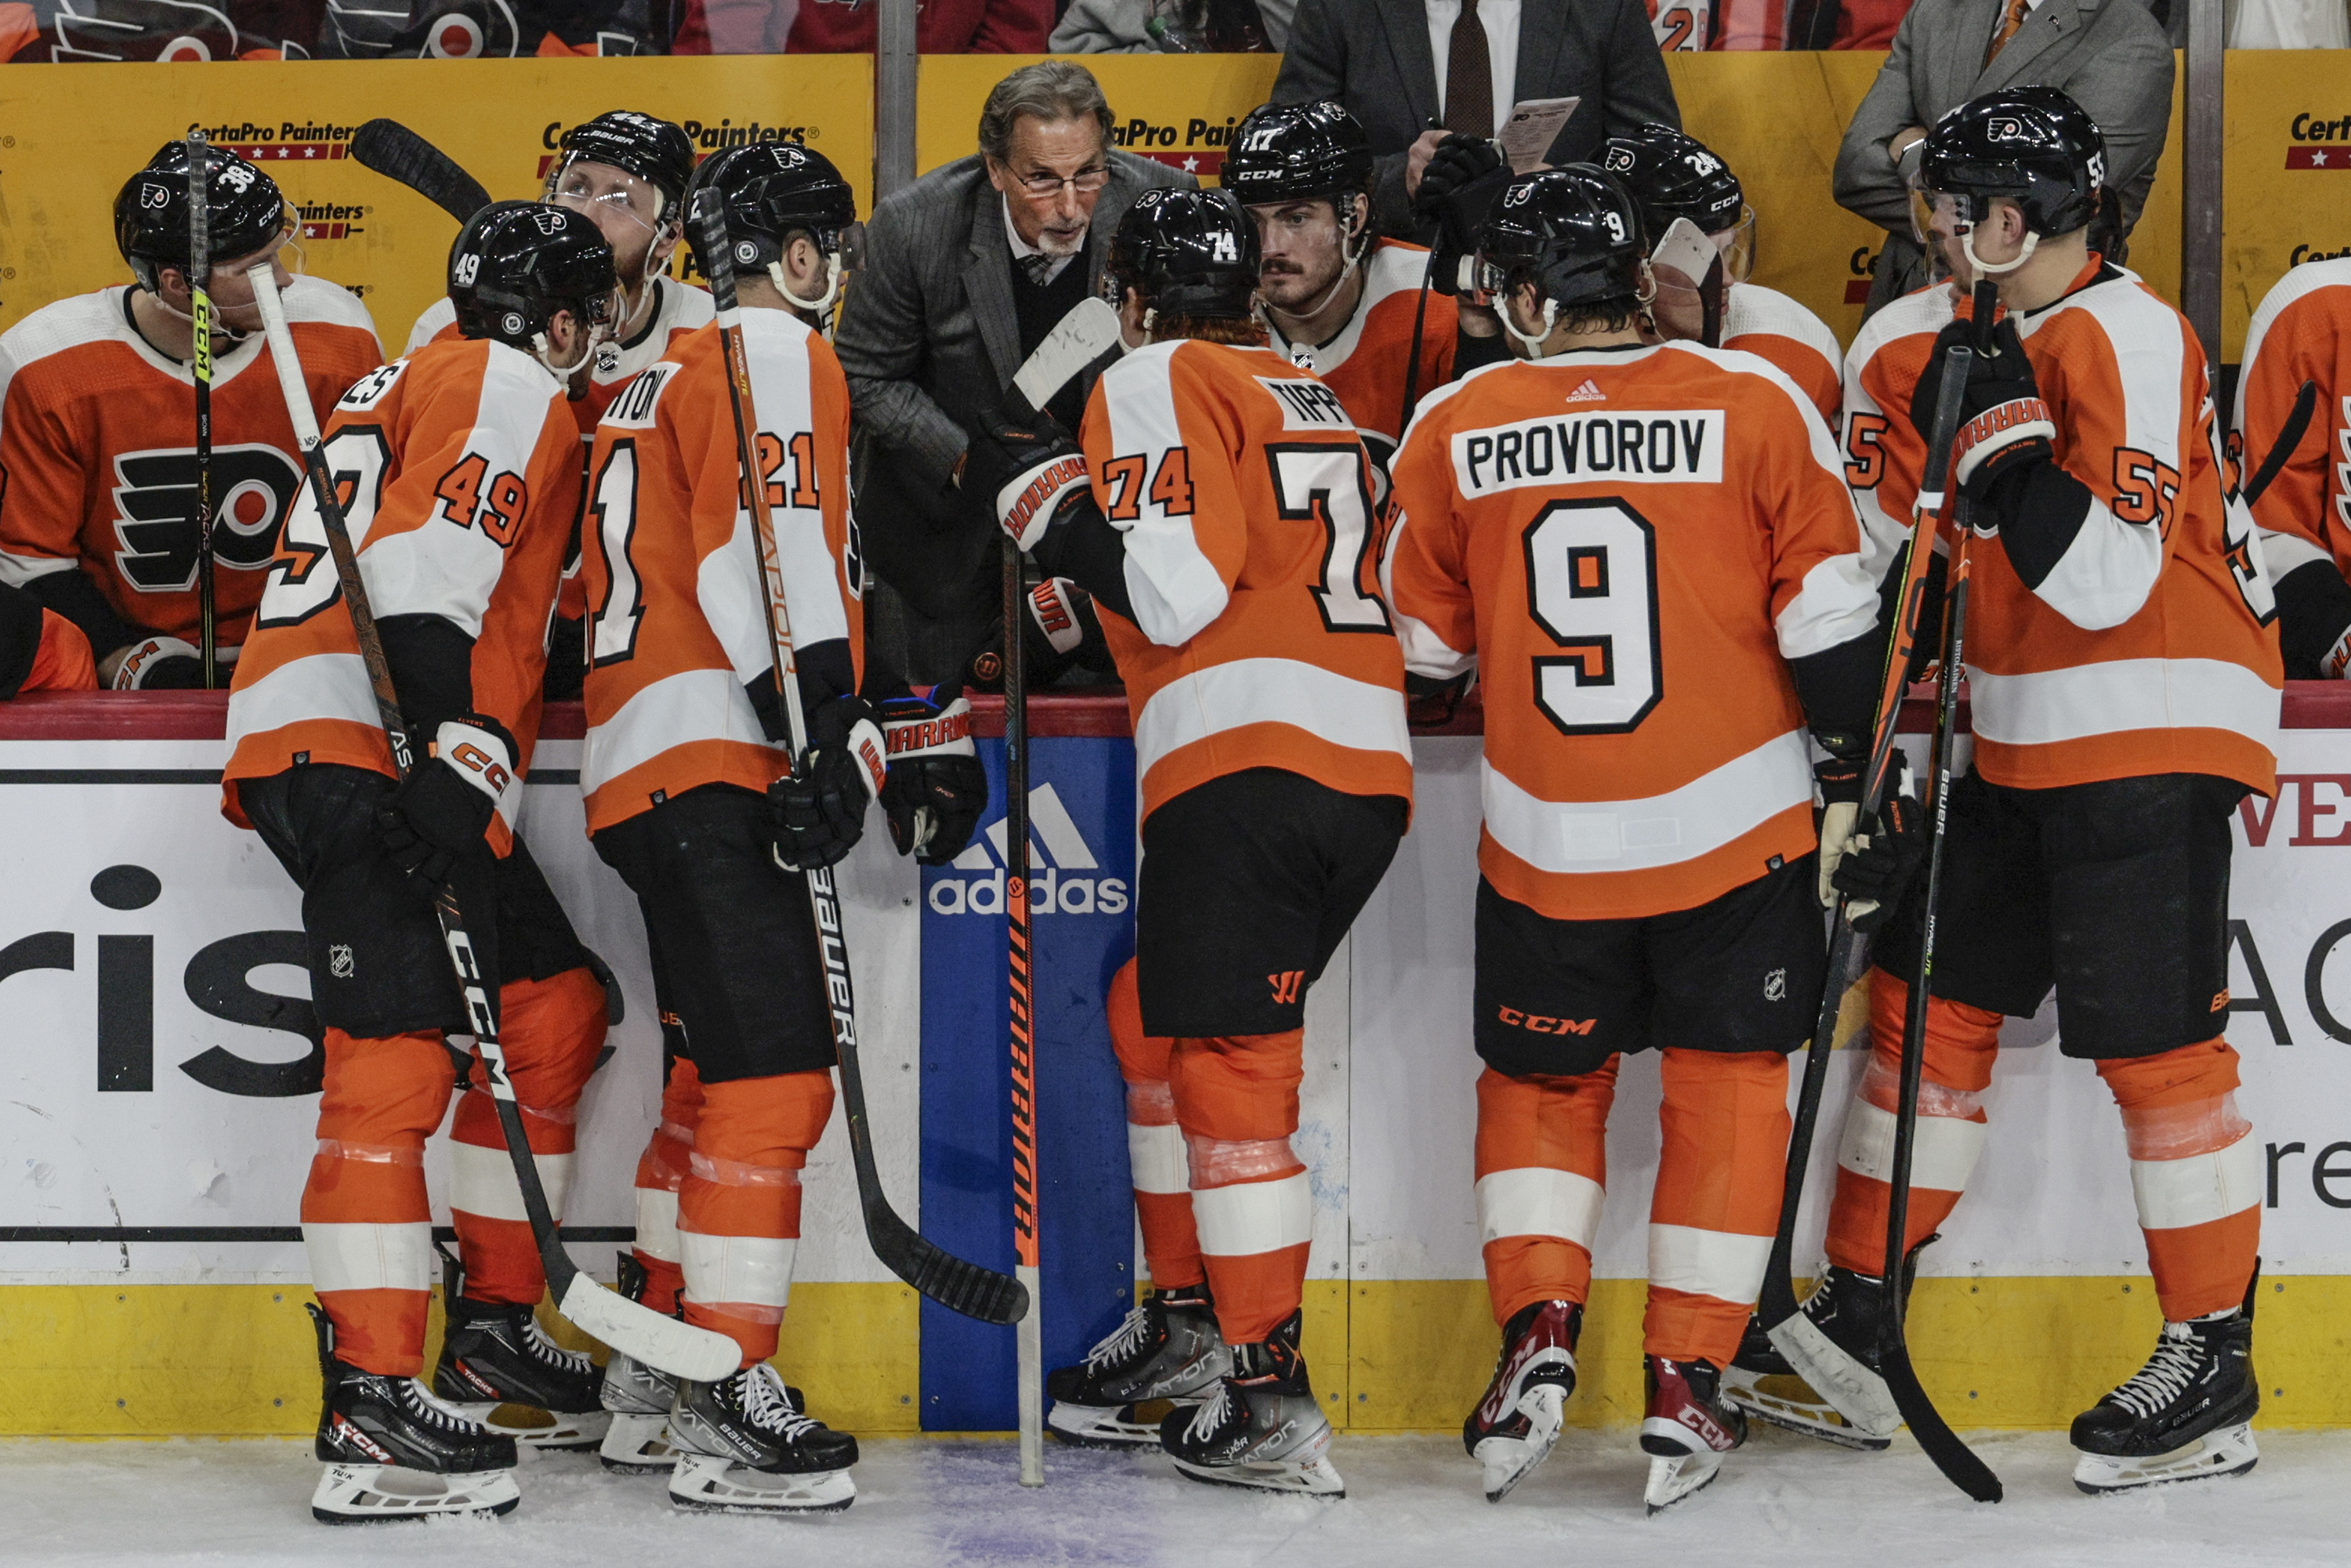 Konecny's hat trick leads surging Flyers past Capitals 5-3, Taiwan News